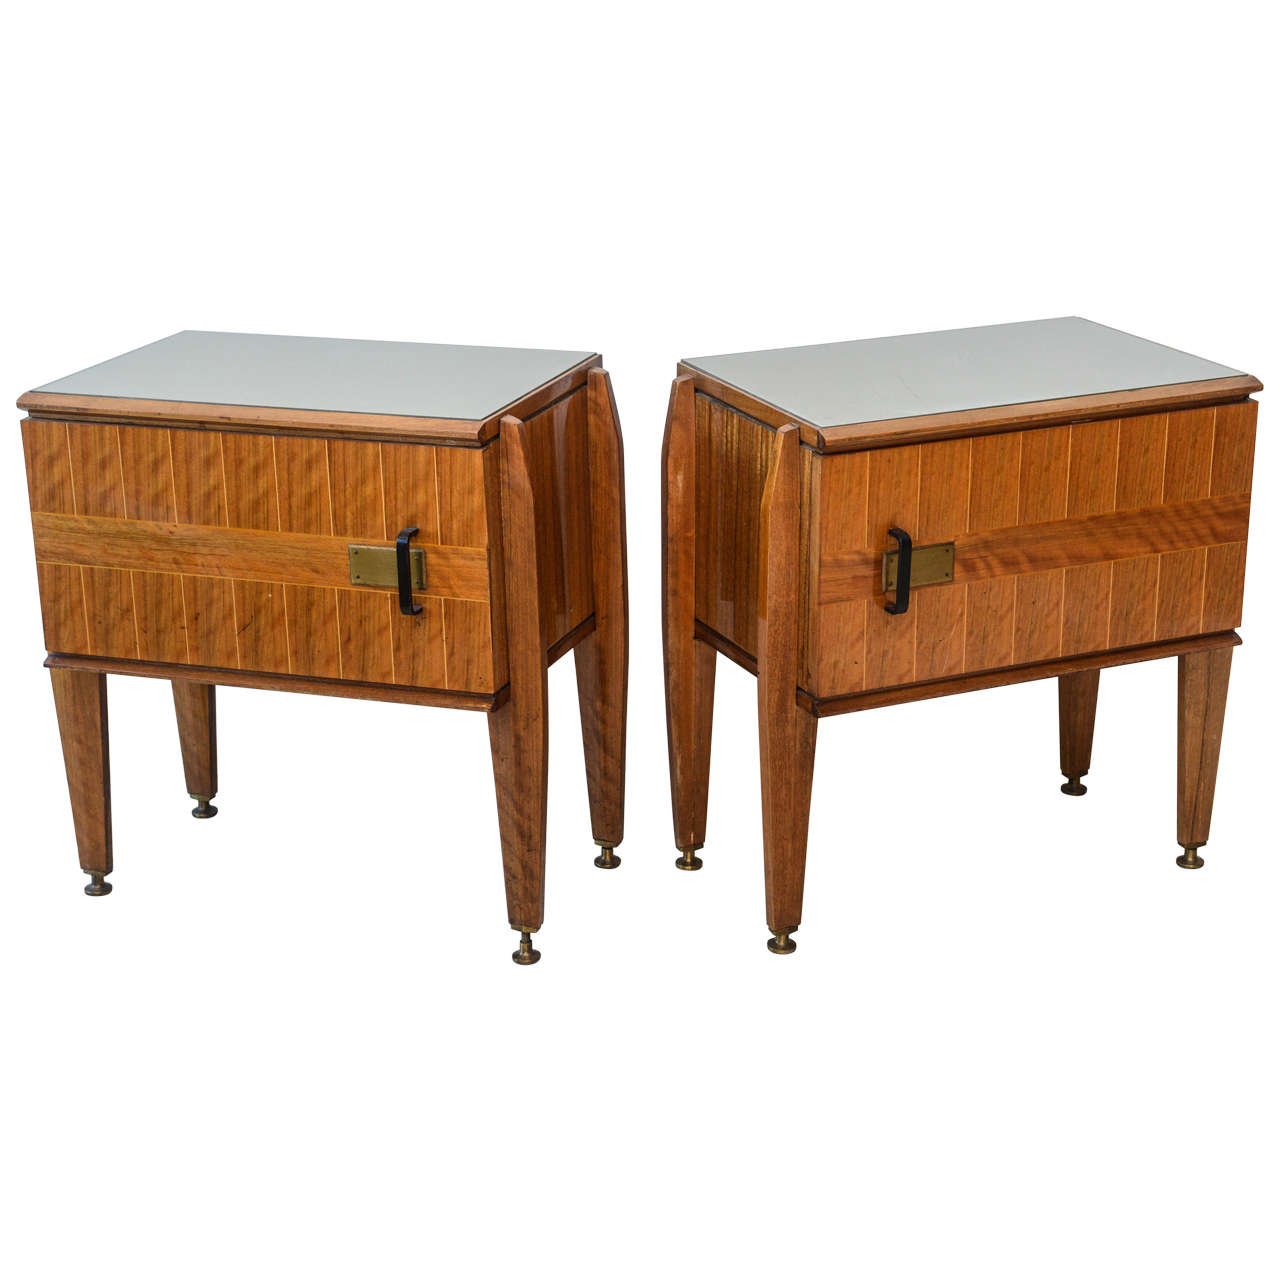 Pair of Italian Modern Inlaid Mixed Wood and Bronze Night Tables, Dassi